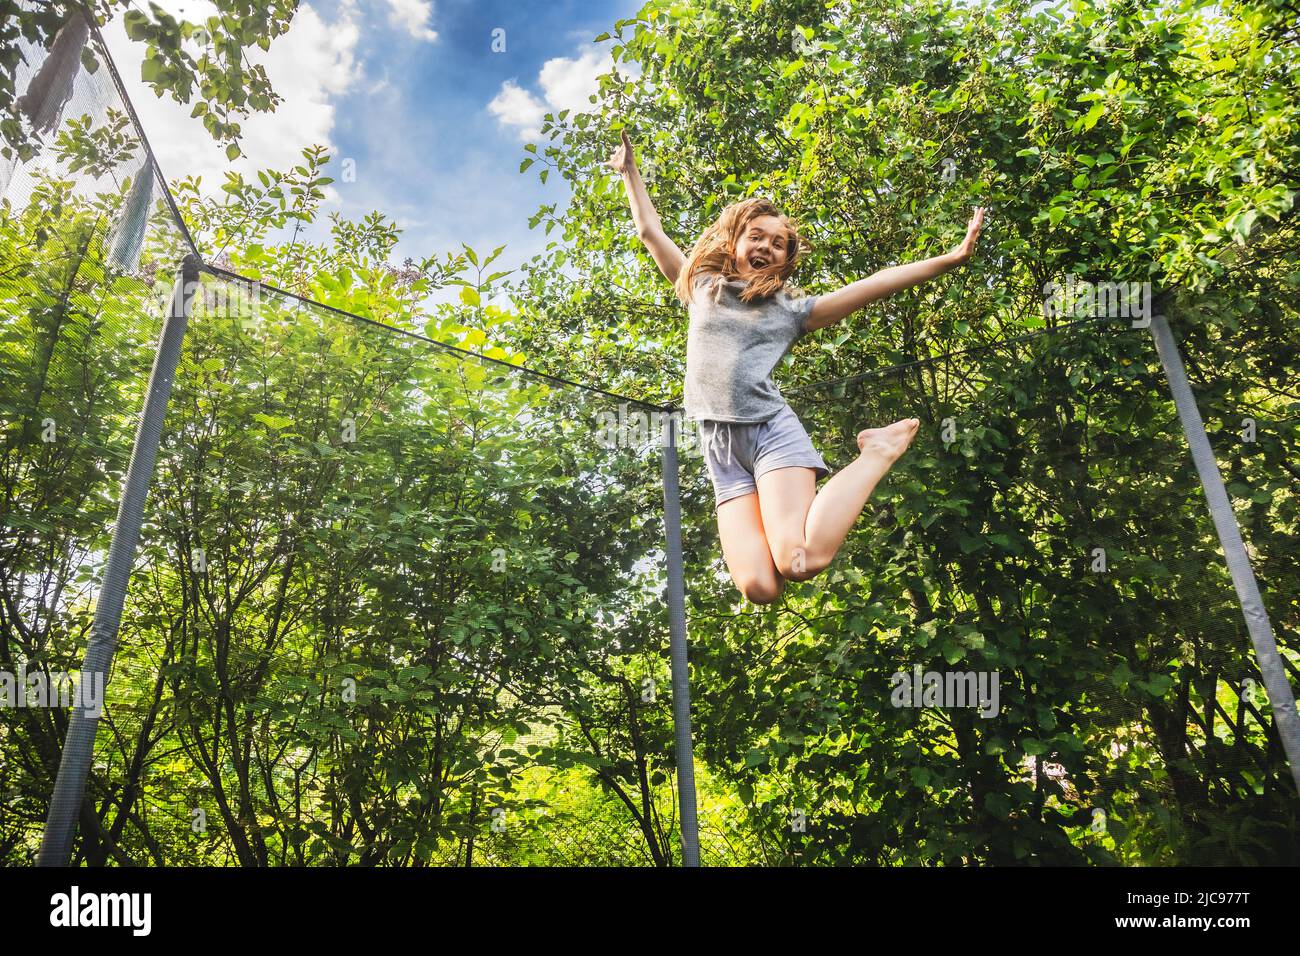 Preteen girl having fun bouncing on a trampoline in a backyard on a summer day Stock Photo